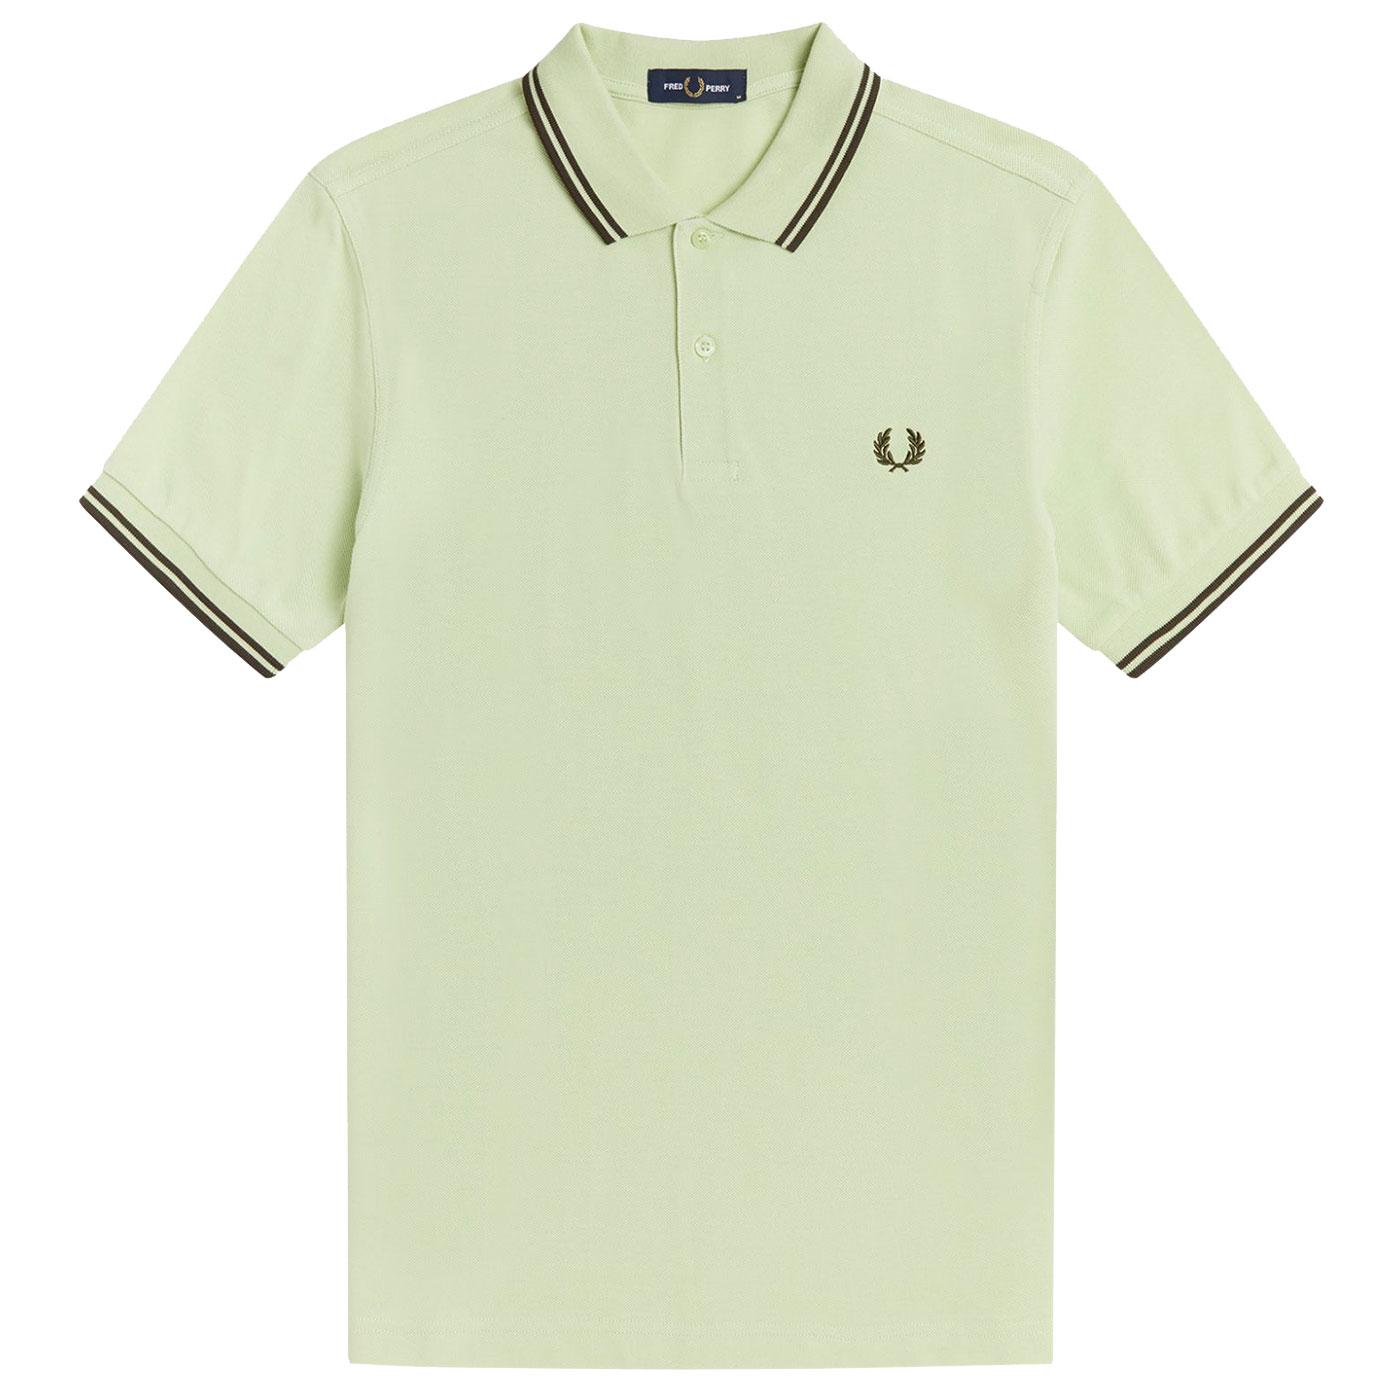 FRED PERRY M3600 Twin Tipped Mod Polo Shirt WILLOW